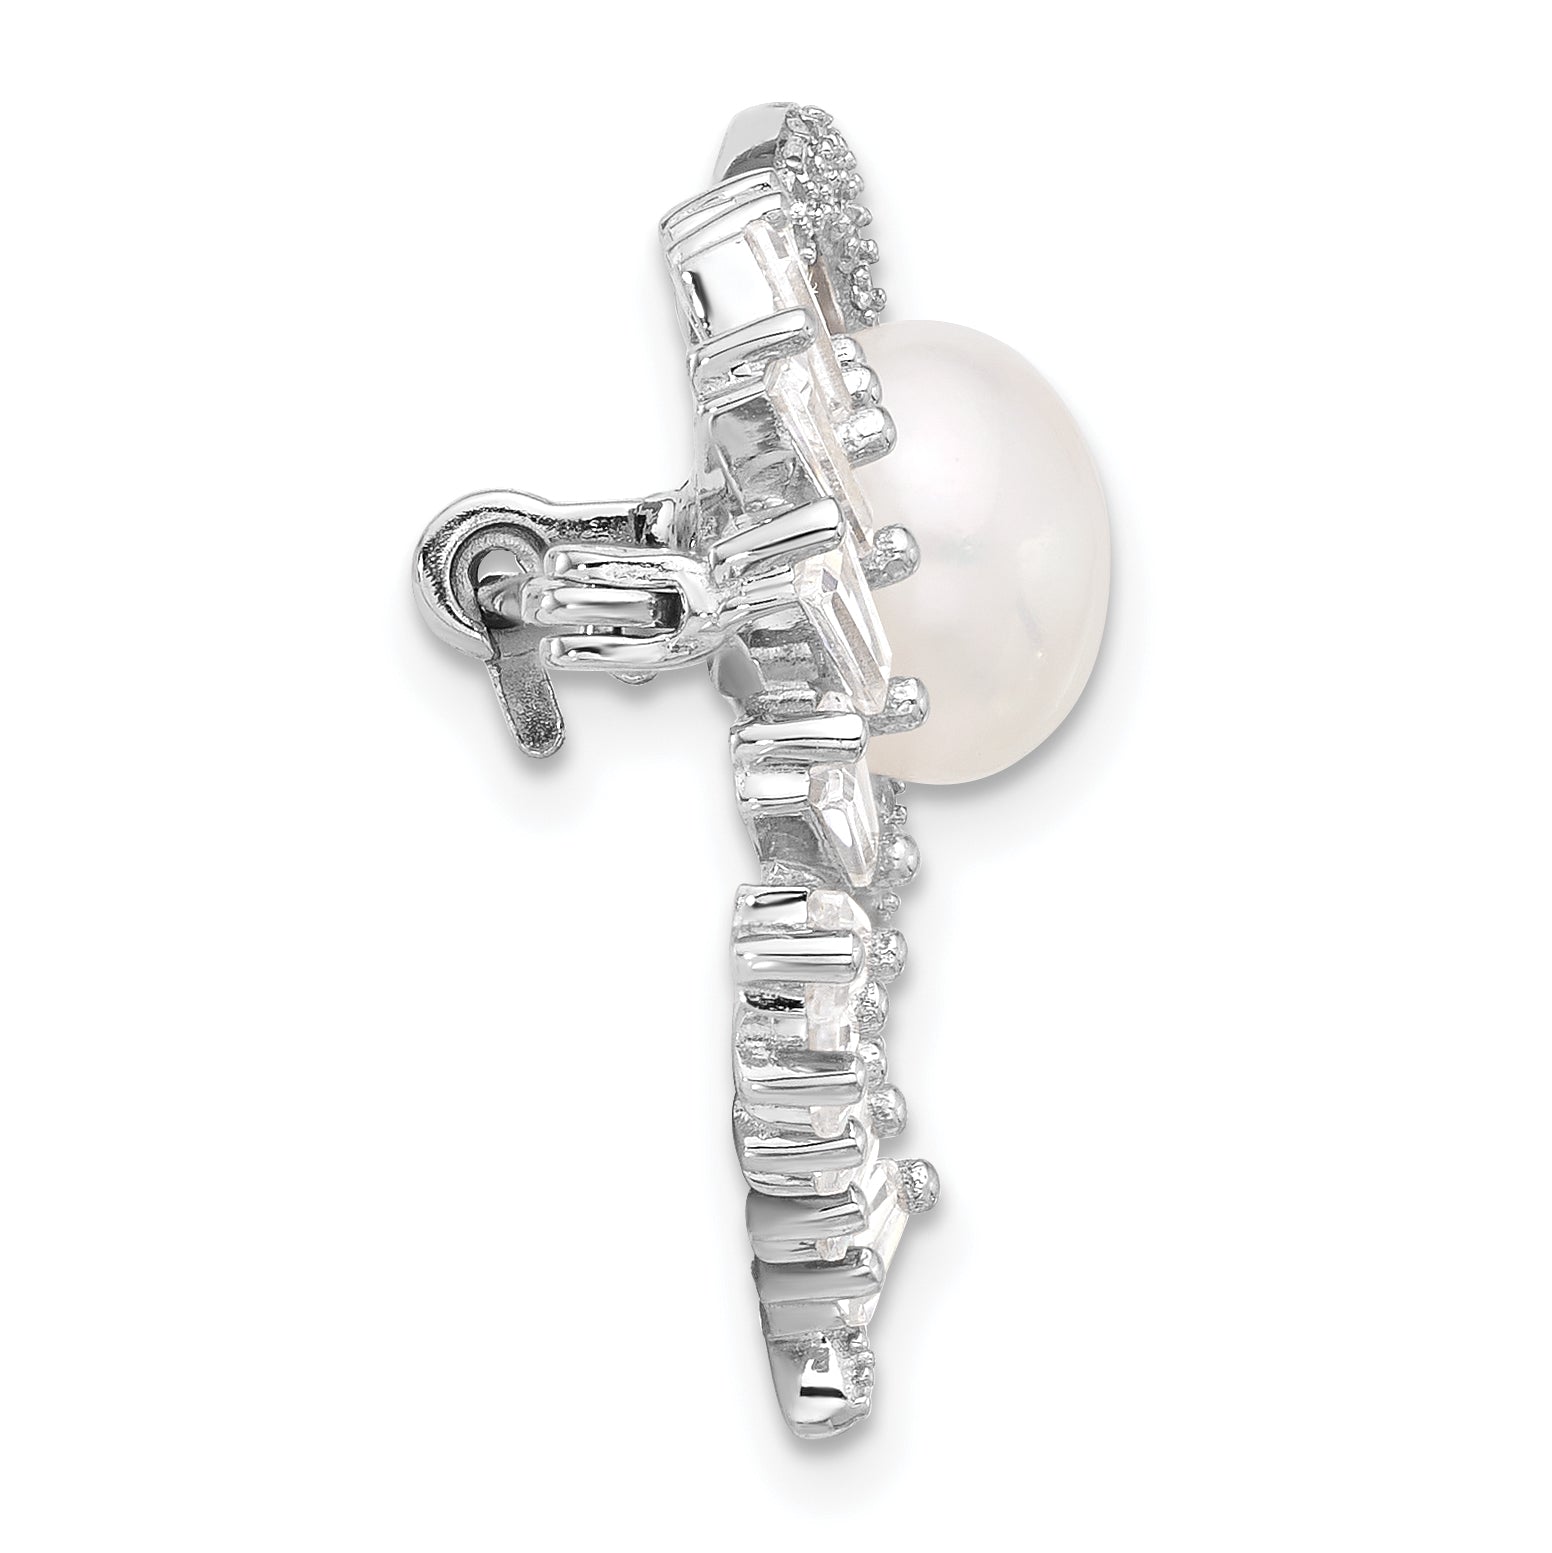 Sterling Silver RH-plated 8-9mm Button White FWC Pearl and CZ Heart Pin